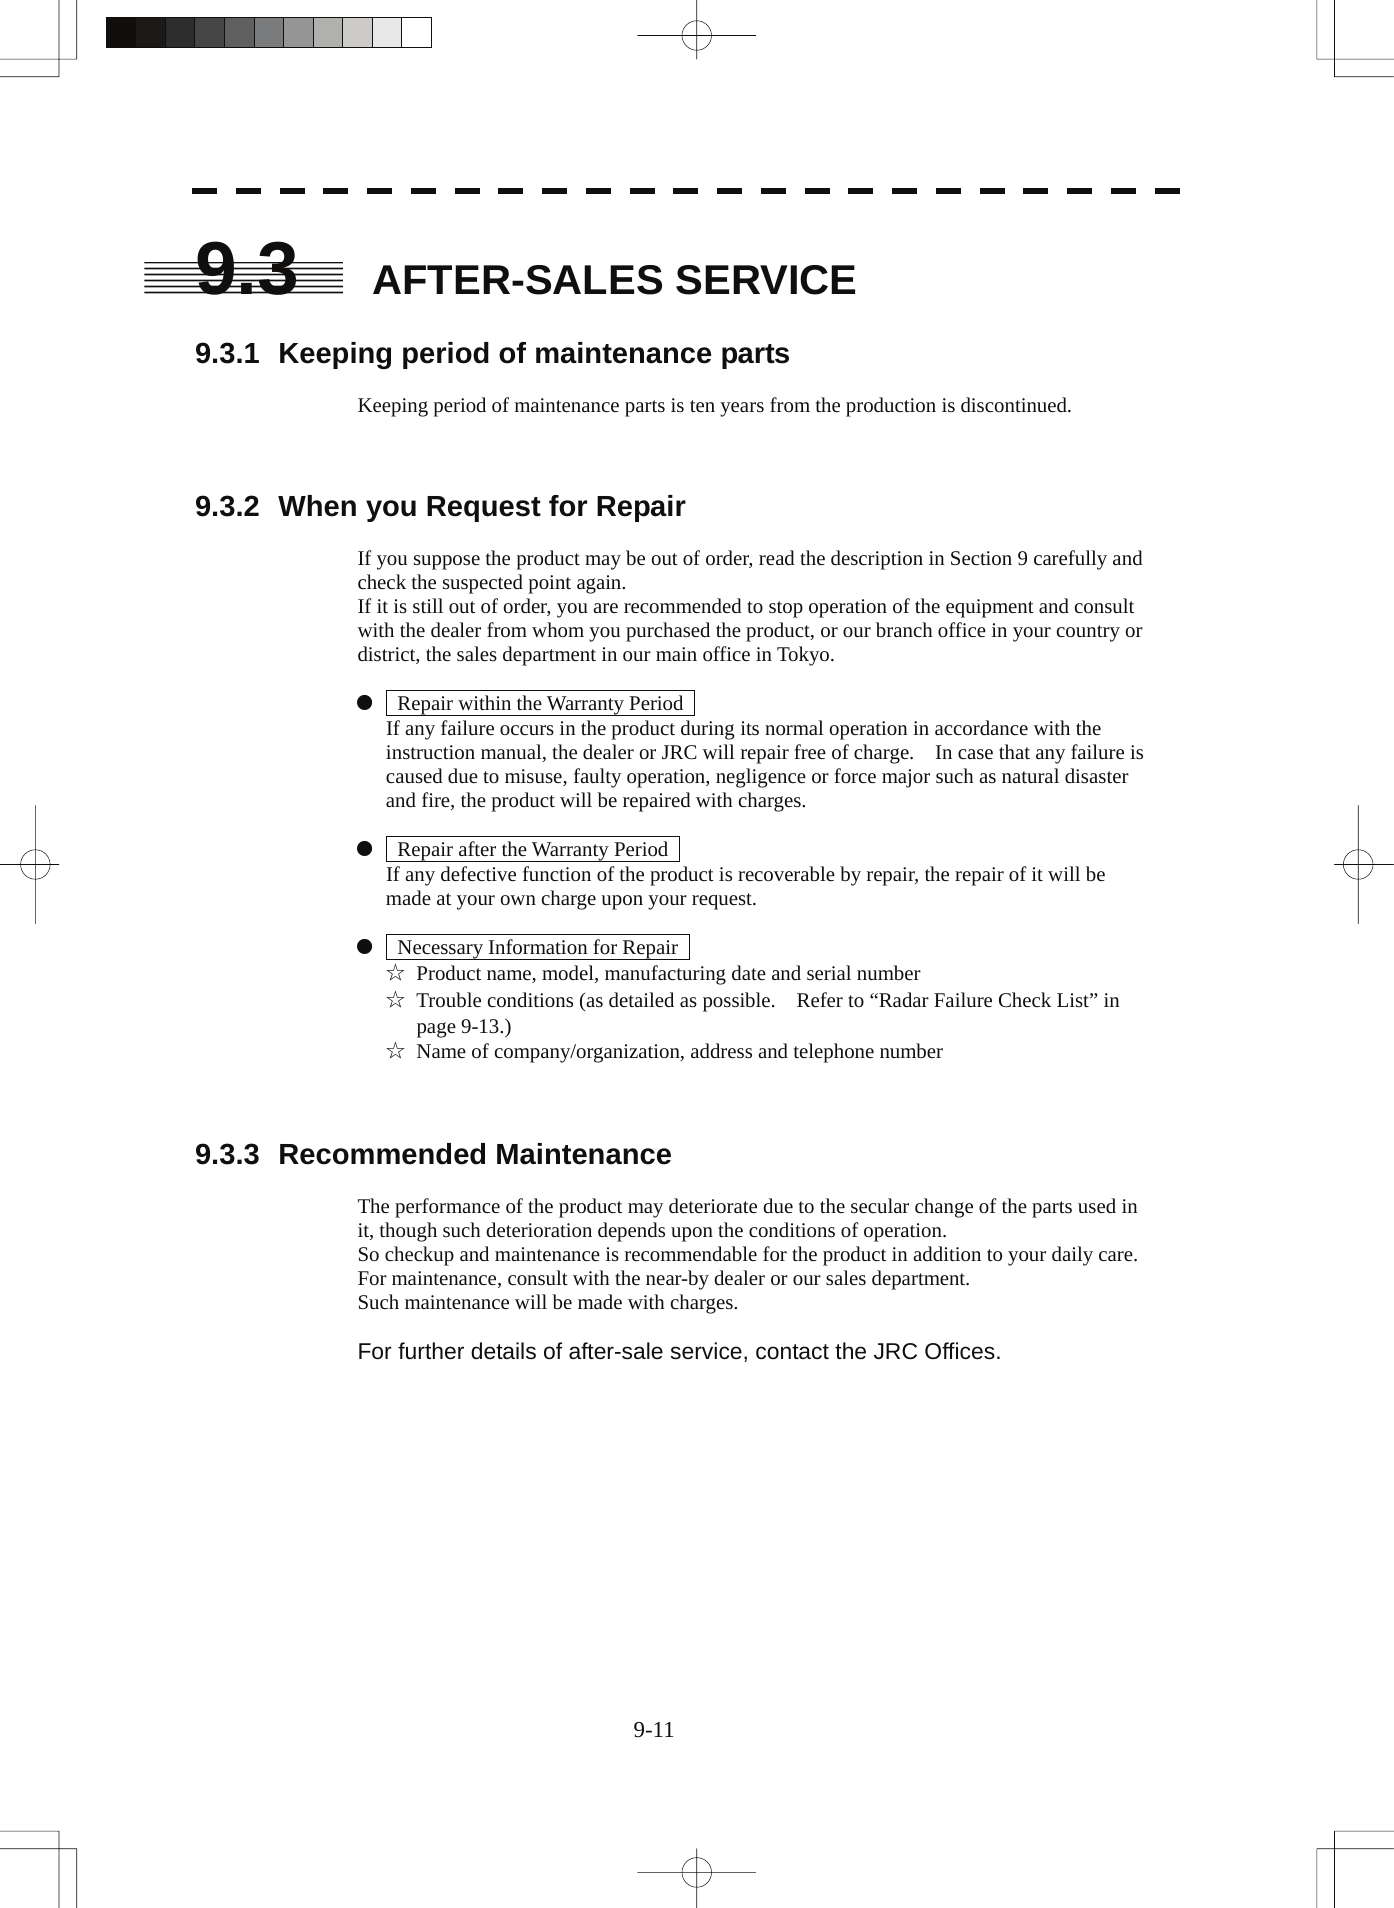  9-11 9.3 AFTER-SALES SERVICE  9.3.1  Keeping period of maintenance parts  Keeping period of maintenance parts is ten years from the production is discontinued.    9.3.2  When you Request for Repair  If you suppose the product may be out of order, read the description in Section 9 carefully and check the suspected point again. If it is still out of order, you are recommended to stop operation of the equipment and consult with the dealer from whom you purchased the product, or our branch office in your country or district, the sales department in our main office in Tokyo.  z    Repair within the Warranty Period     If any failure occurs in the product during its normal operation in accordance with the instruction manual, the dealer or JRC will repair free of charge.    In case that any failure is caused due to misuse, faulty operation, negligence or force major such as natural disaster and fire, the product will be repaired with charges.  z    Repair after the Warranty Period     If any defective function of the product is recoverable by repair, the repair of it will be made at your own charge upon your request.  z    Necessary Information for Repair   ☆  Product name, model, manufacturing date and serial number ☆  Trouble conditions (as detailed as possible.    Refer to “Radar Failure Check List” in page 9-13.) ☆  Name of company/organization, address and telephone number    9.3.3 Recommended Maintenance  The performance of the product may deteriorate due to the secular change of the parts used in it, though such deterioration depends upon the conditions of operation. So checkup and maintenance is recommendable for the product in addition to your daily care. For maintenance, consult with the near-by dealer or our sales department. Such maintenance will be made with charges.  For further details of after-sale service, contact the JRC Offices. 